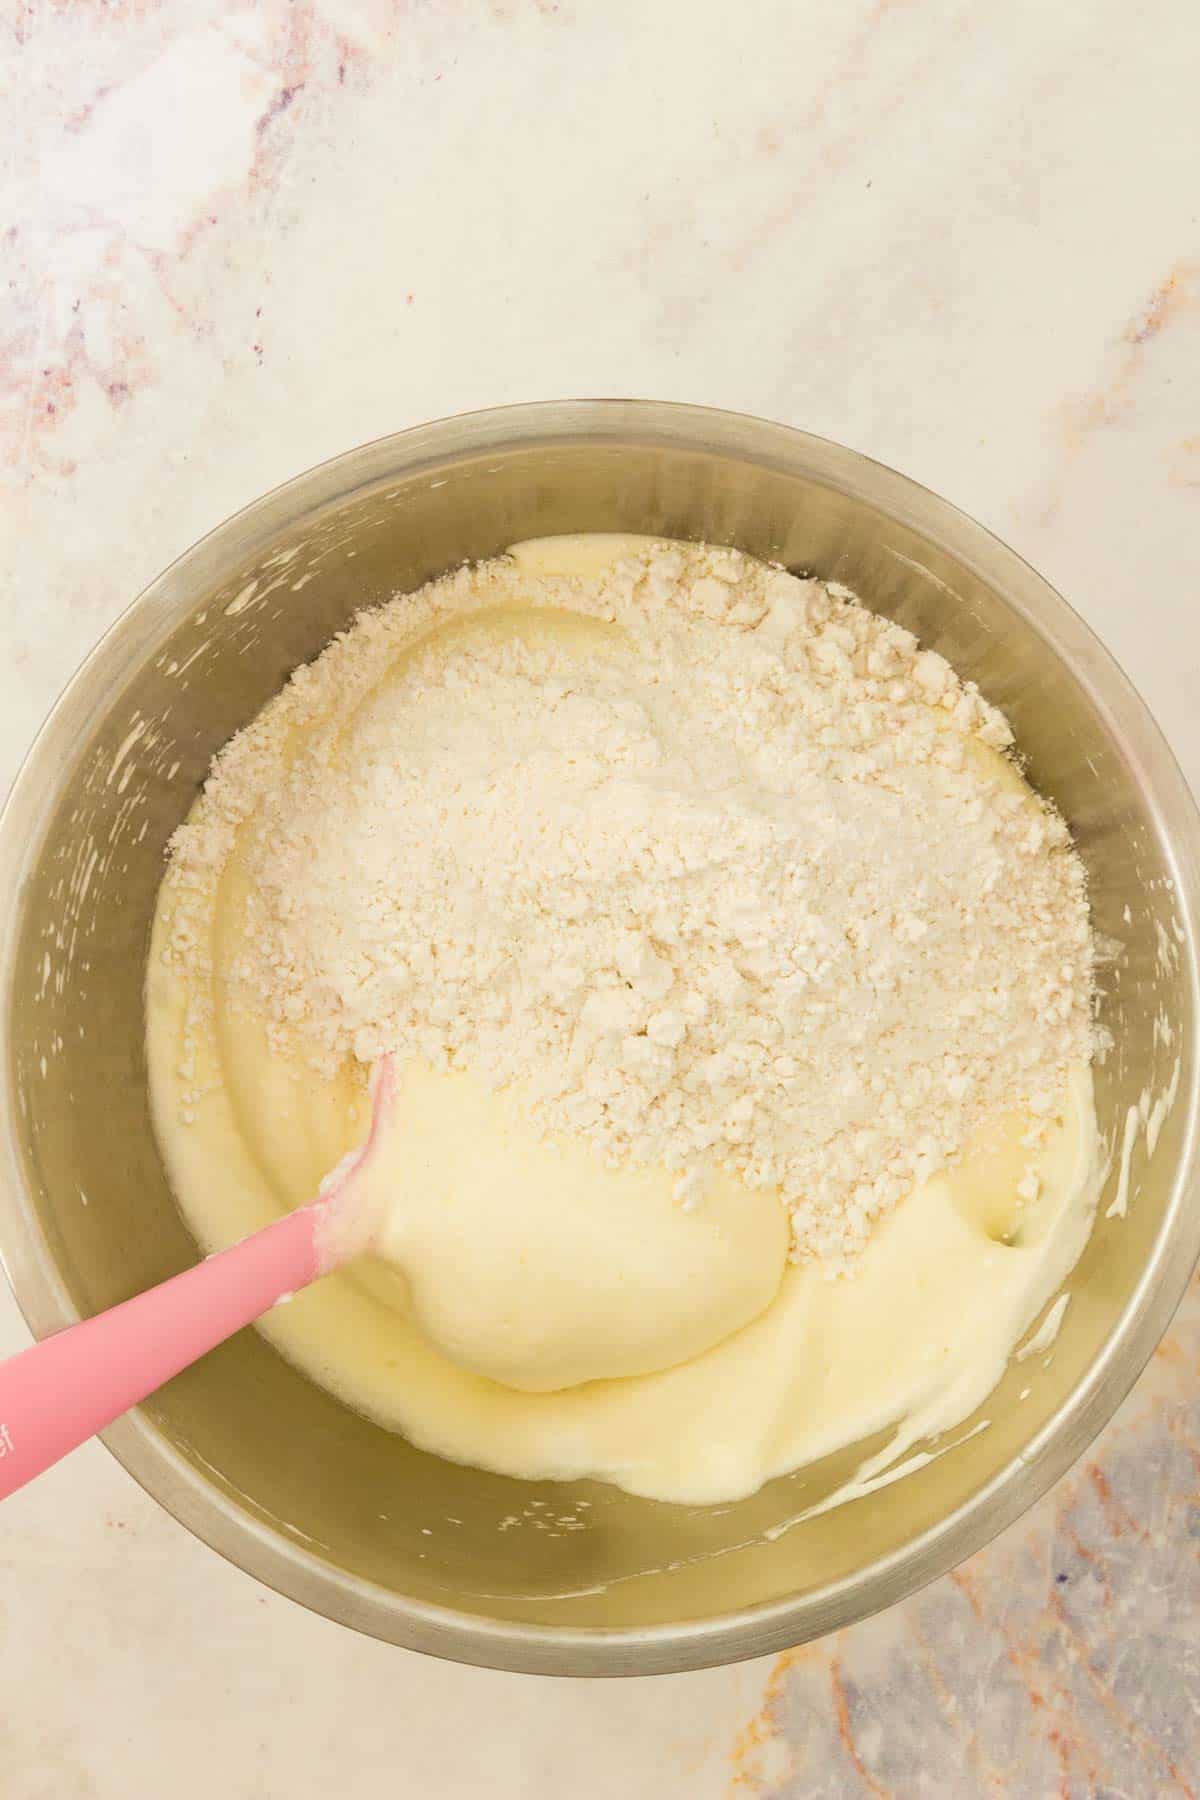 Dry ingredients added to a bowl of whipped egg mixture for gluten free ladyfinger batter.